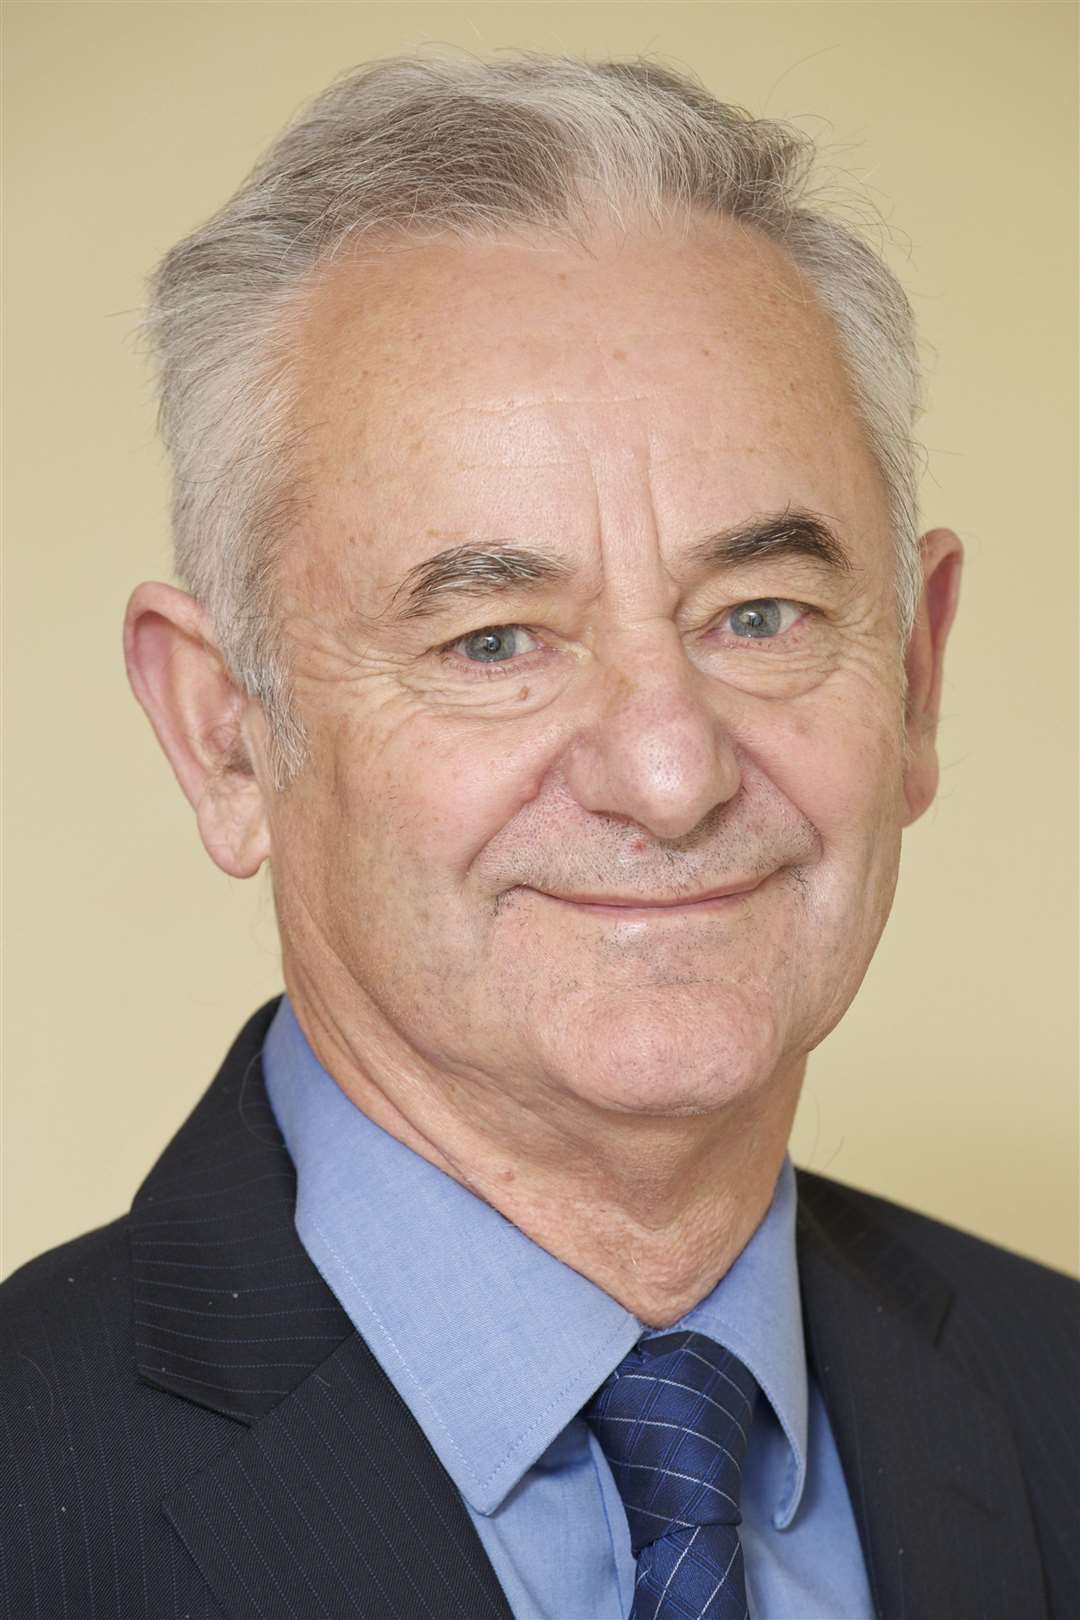 Cllr Roger Truelove, leader of Swale council